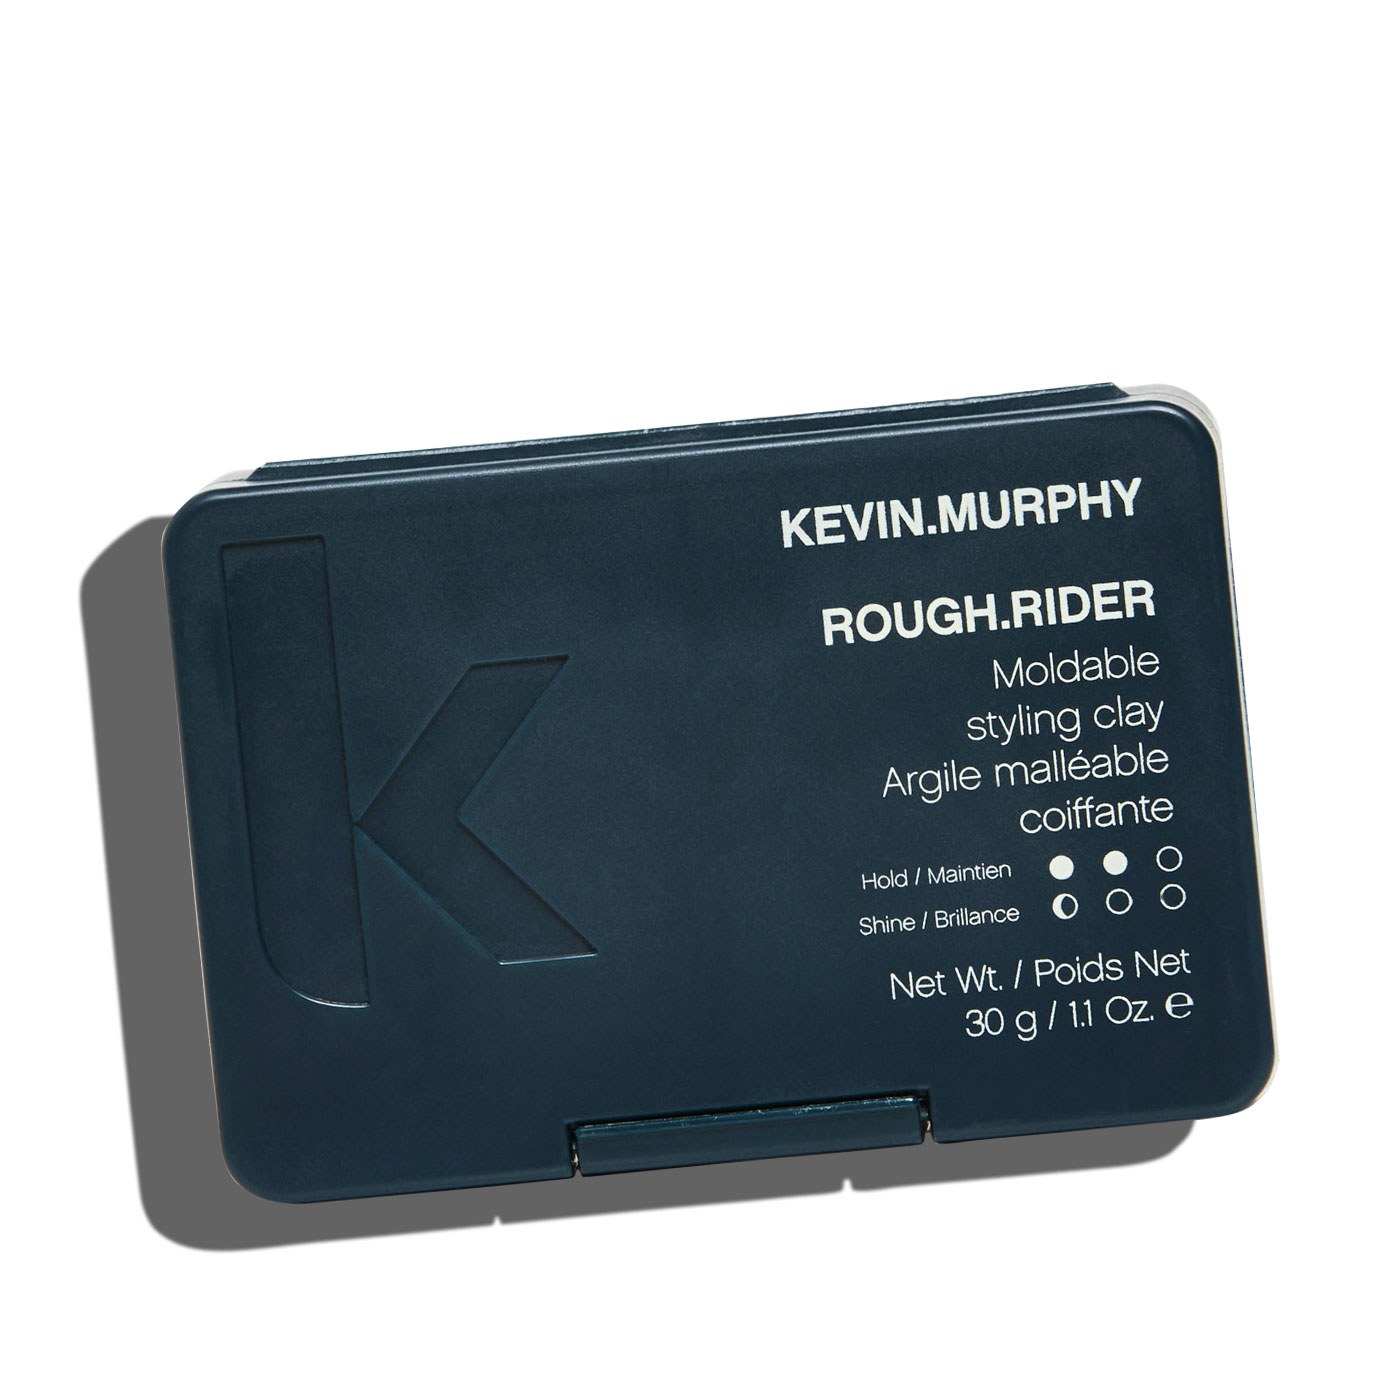 KEVIN.MURPHY For Men: ROUGH.RIDER 1.1oz